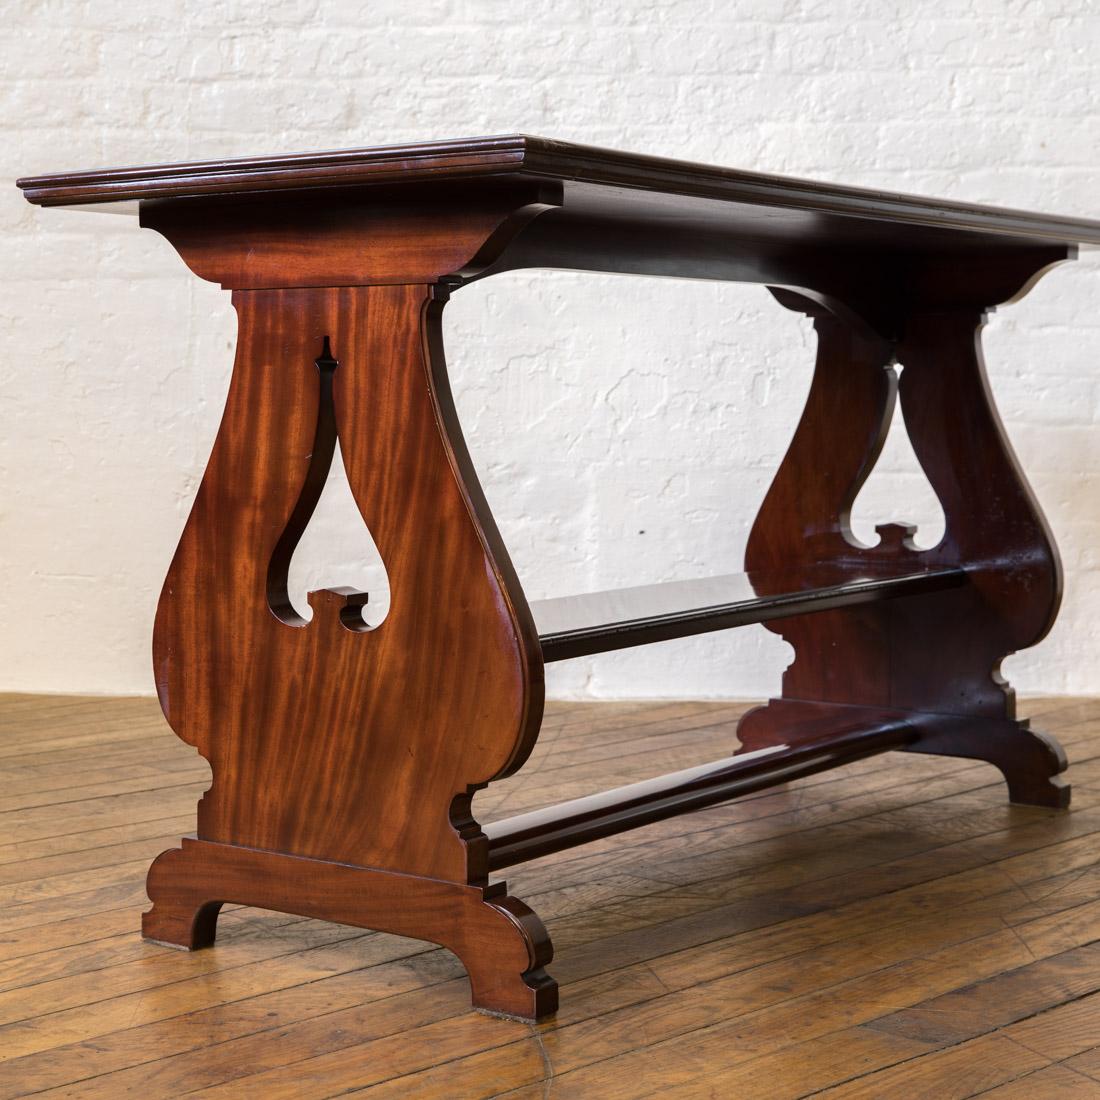 A top quality solid mahogany table that probably originated as a library table although it would equally be at home as a dining table. Very solid, with it's undershelf and lower stretcher. The end supports have a Arts & Crafts feel, with the simple